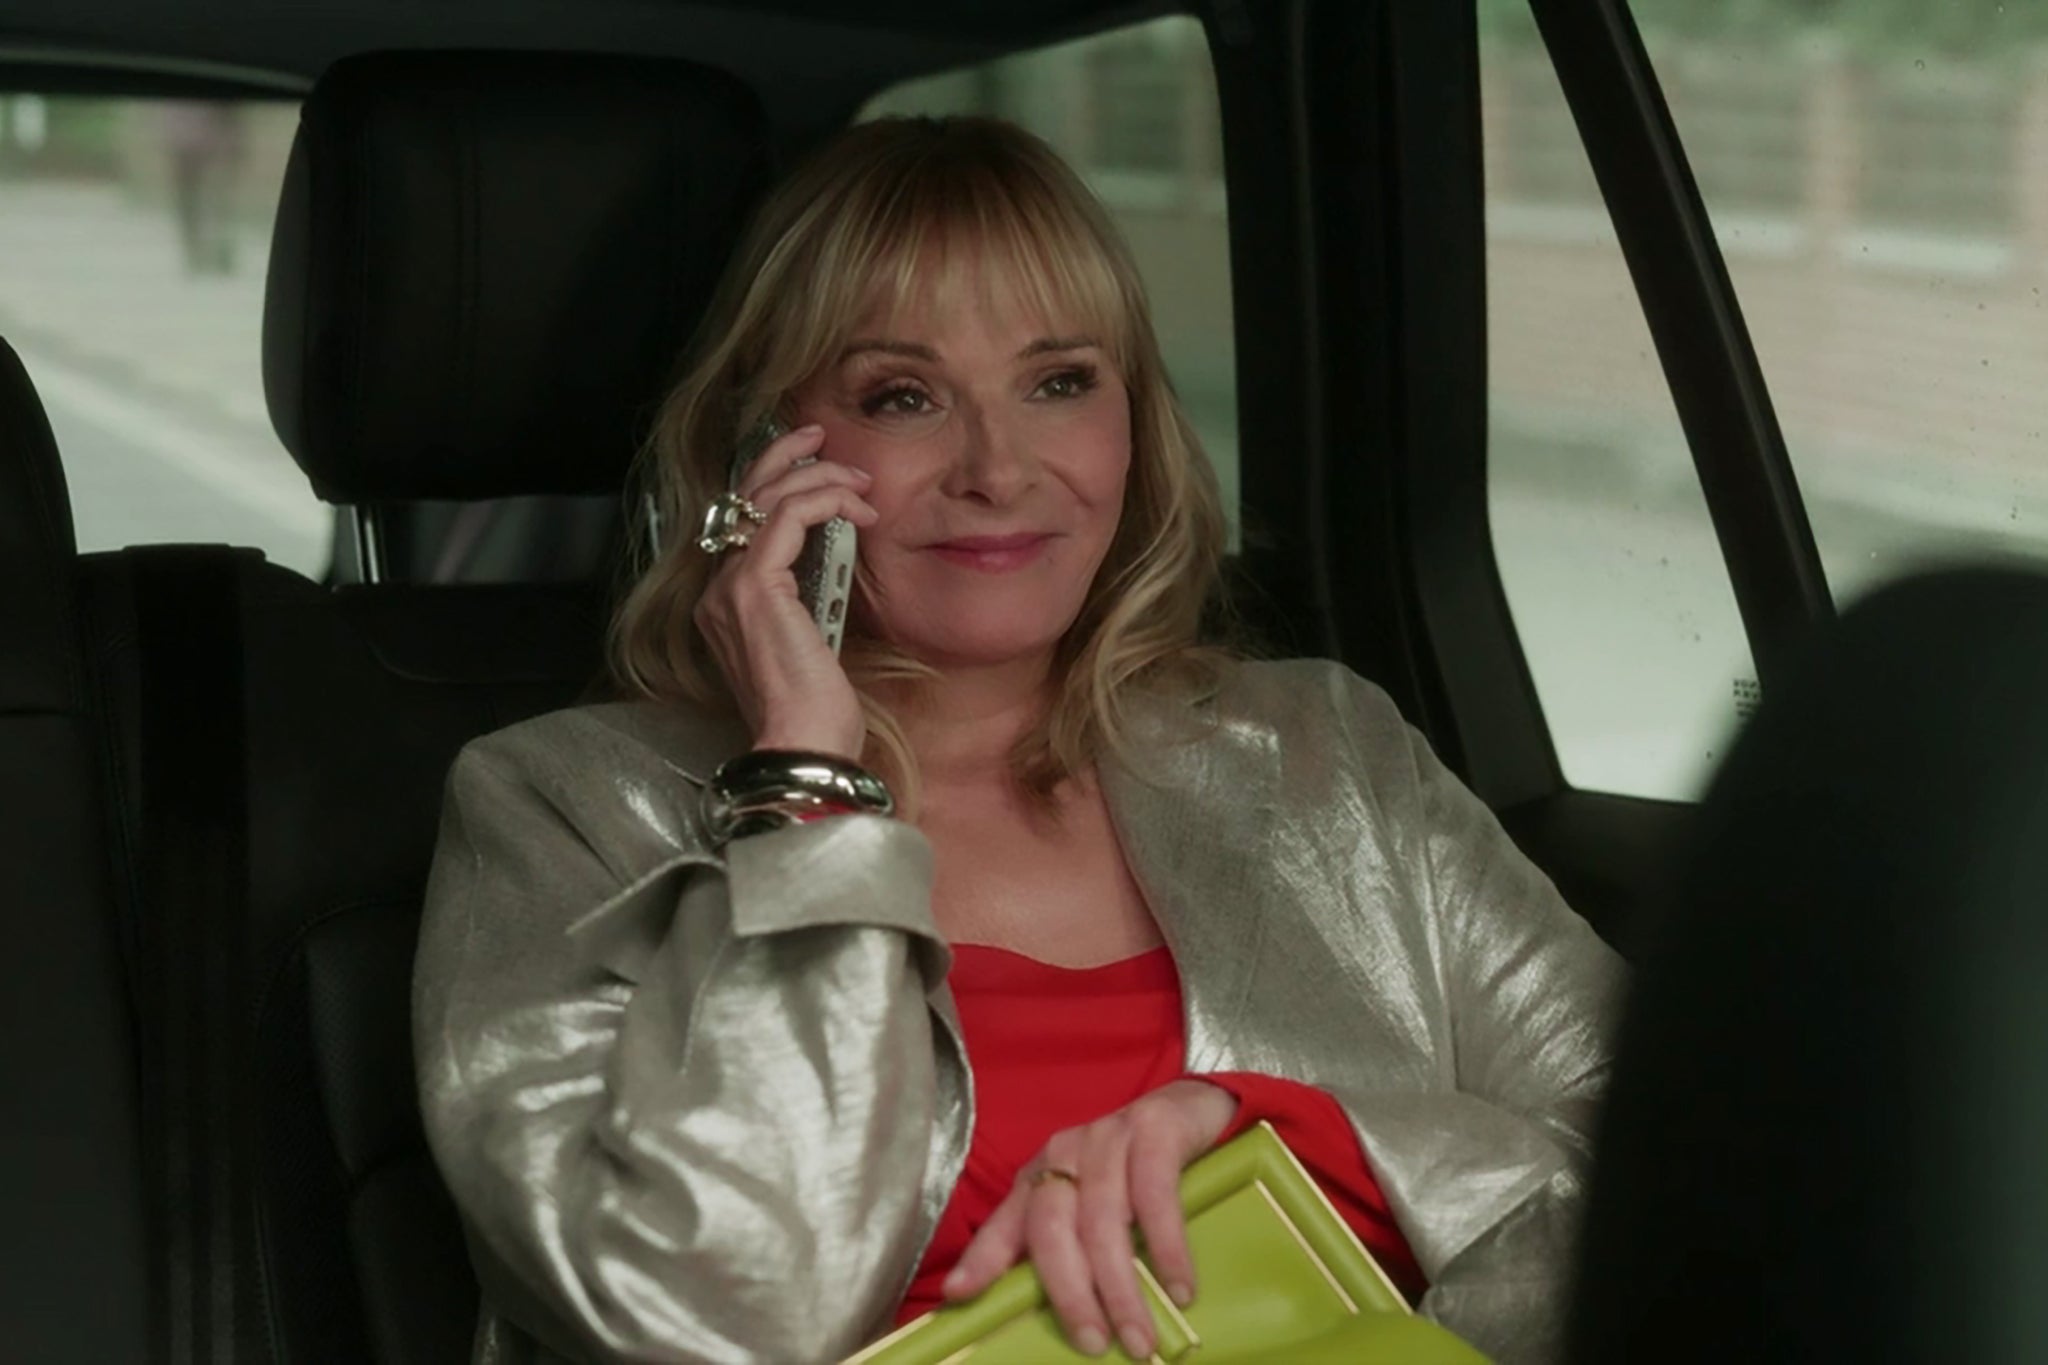 She’s back: Kim Cattrall as Samantha in the ‘And Just Like That’ finale